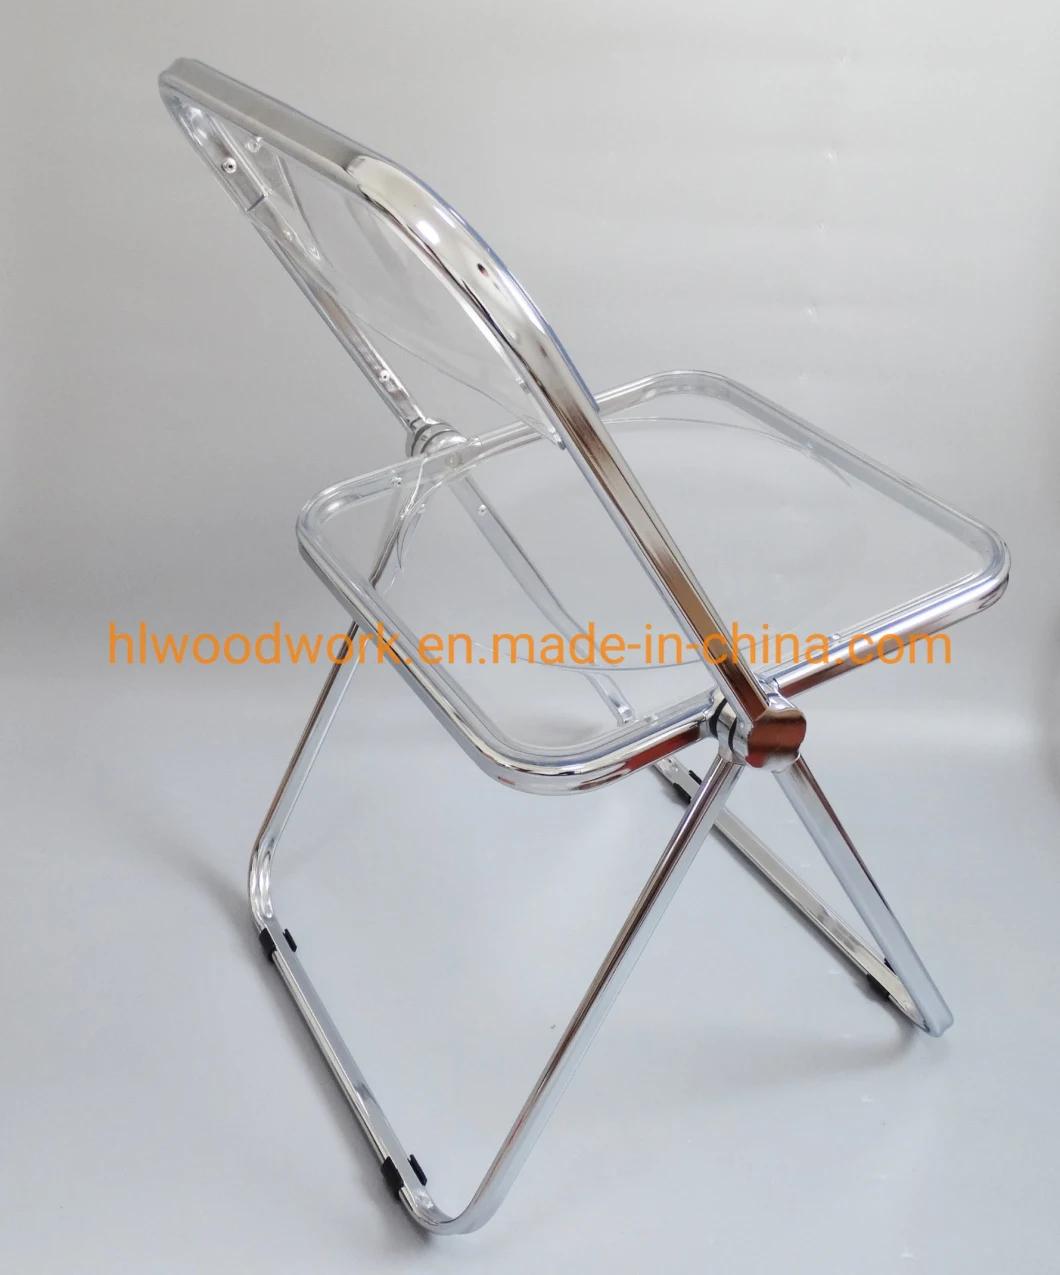 Modern Transparent Blue Folding Chair PC Plastic Dining Room Chair Chrome Frame Office Bar Dining Leisure Banquet Wedding Meeting Chair Plastic Dining Chair